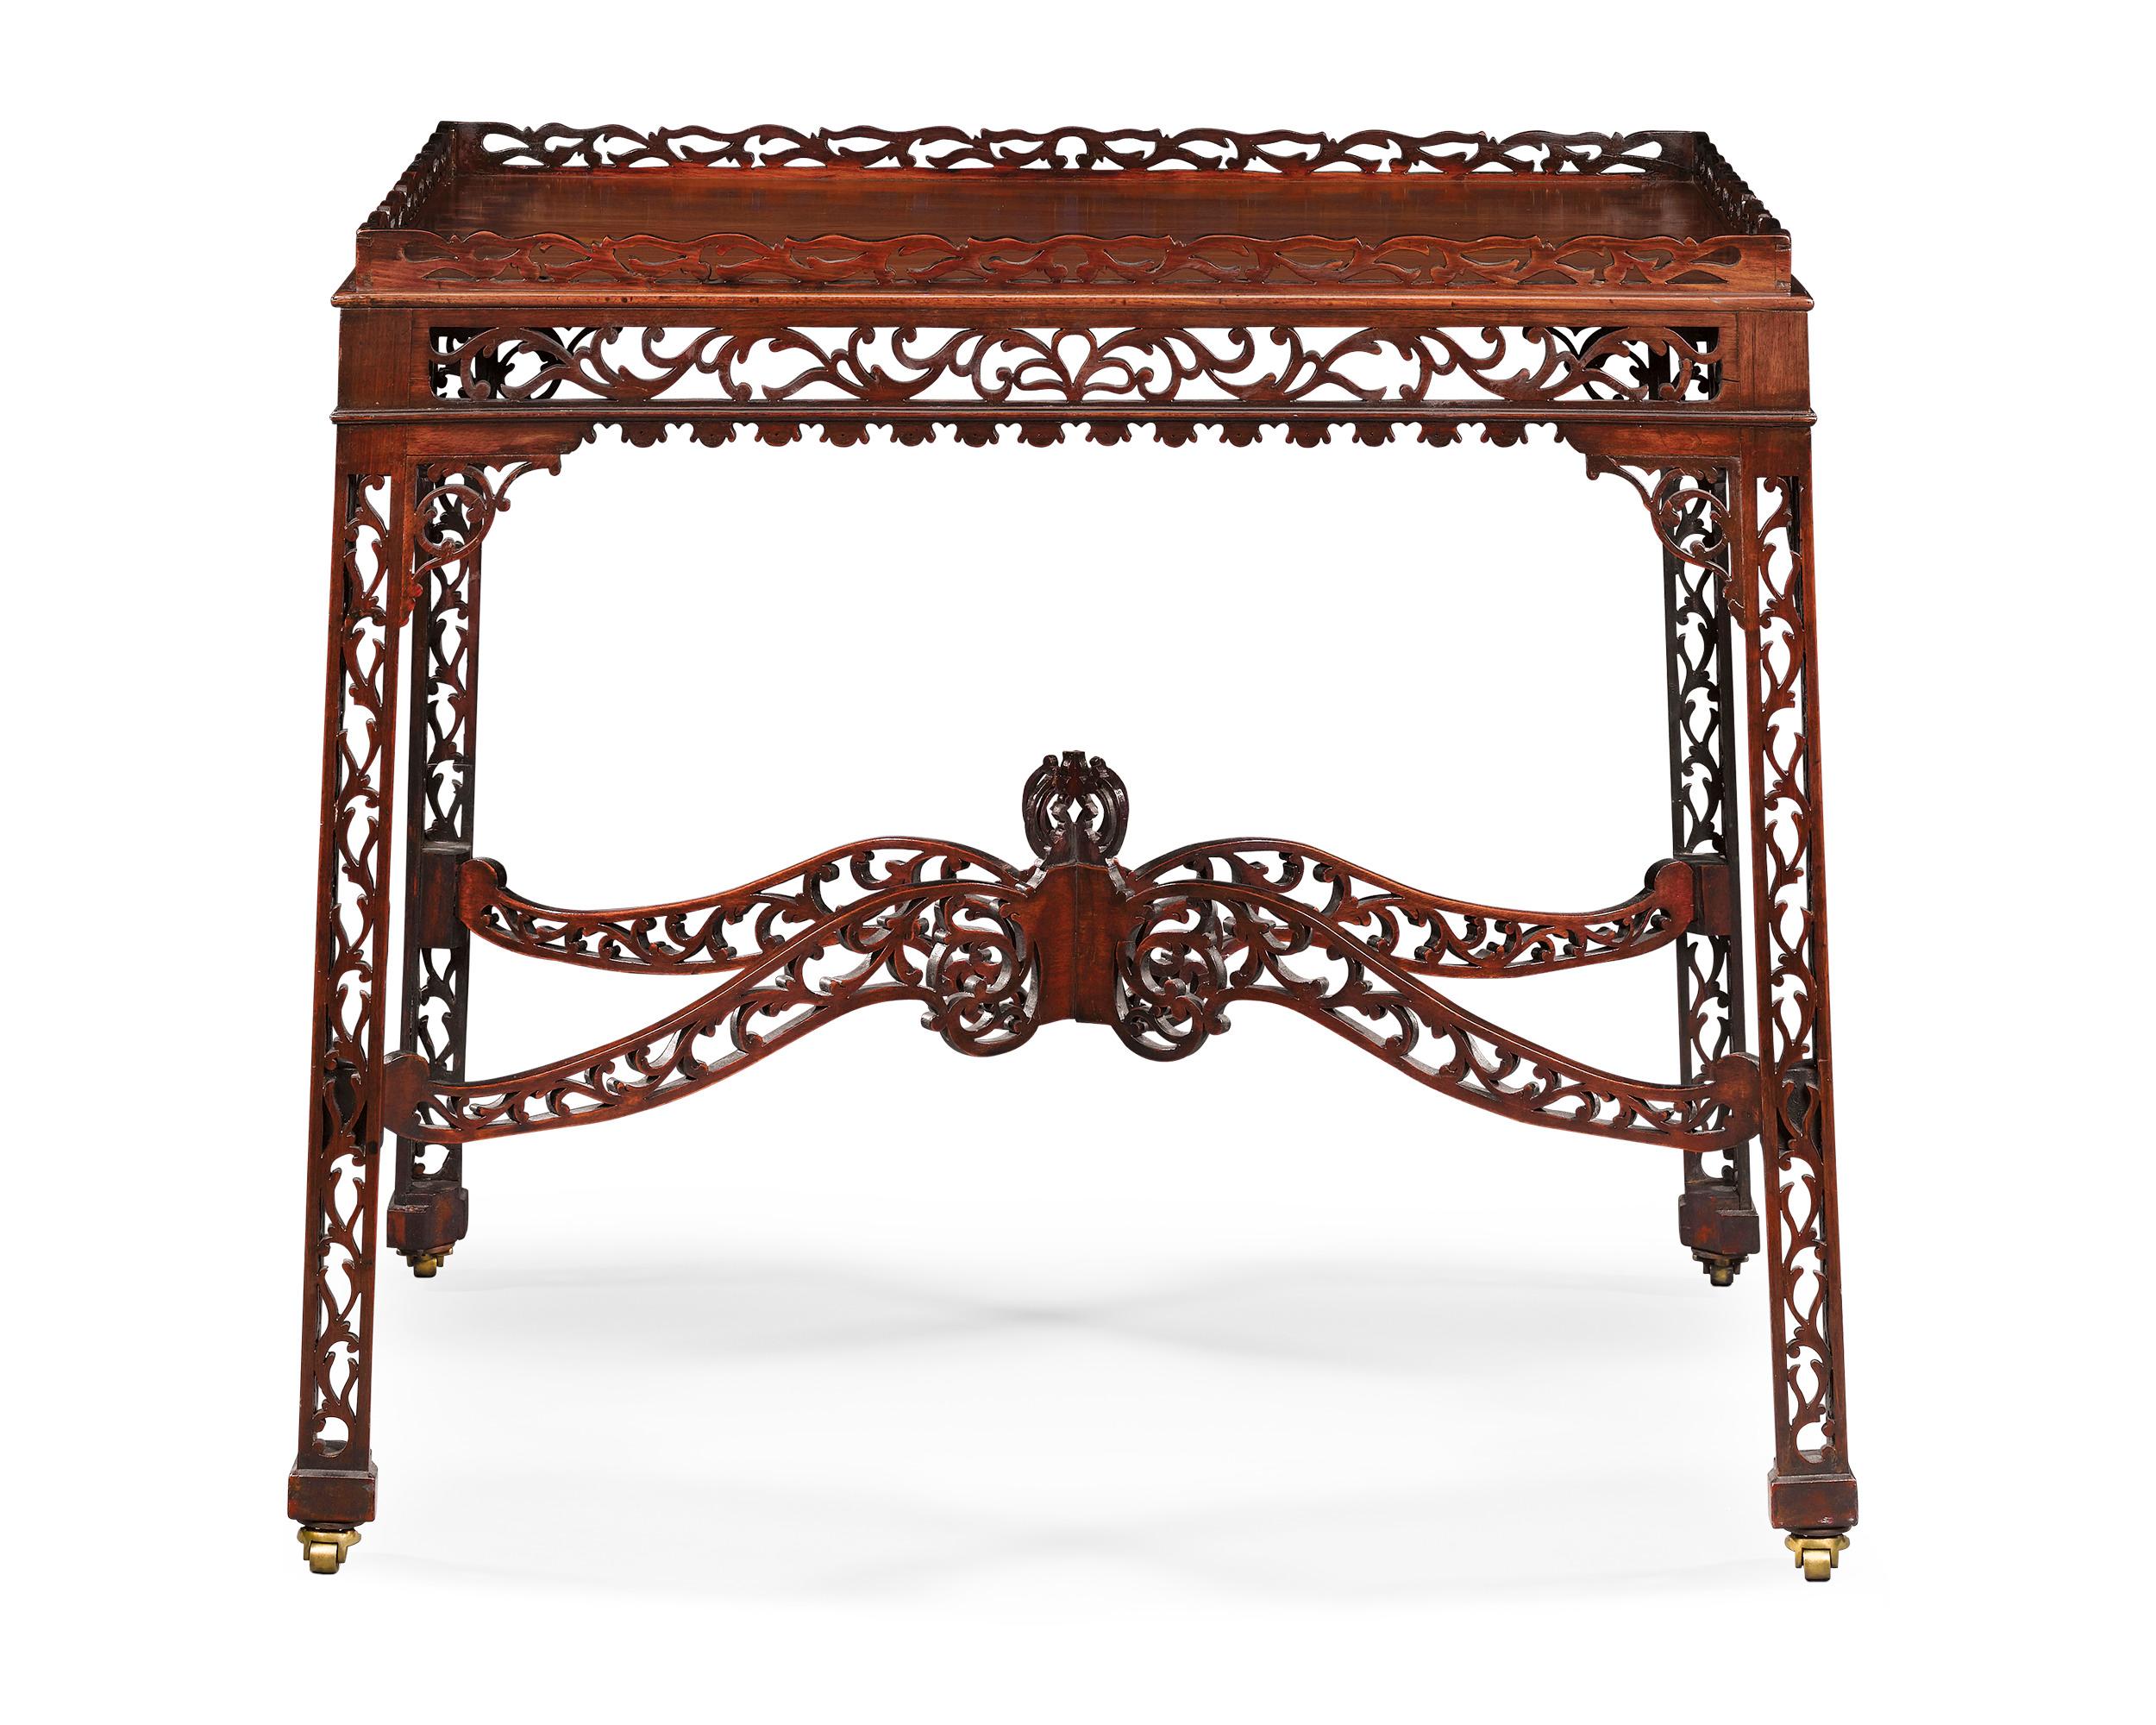 This exquisite English mahogany tea table is a stunning example of the elaborate Chinese Chippendale style. A study in symmetry and balance, this table combines the restrained elegance of the Georgian period with the intricate artistry of the